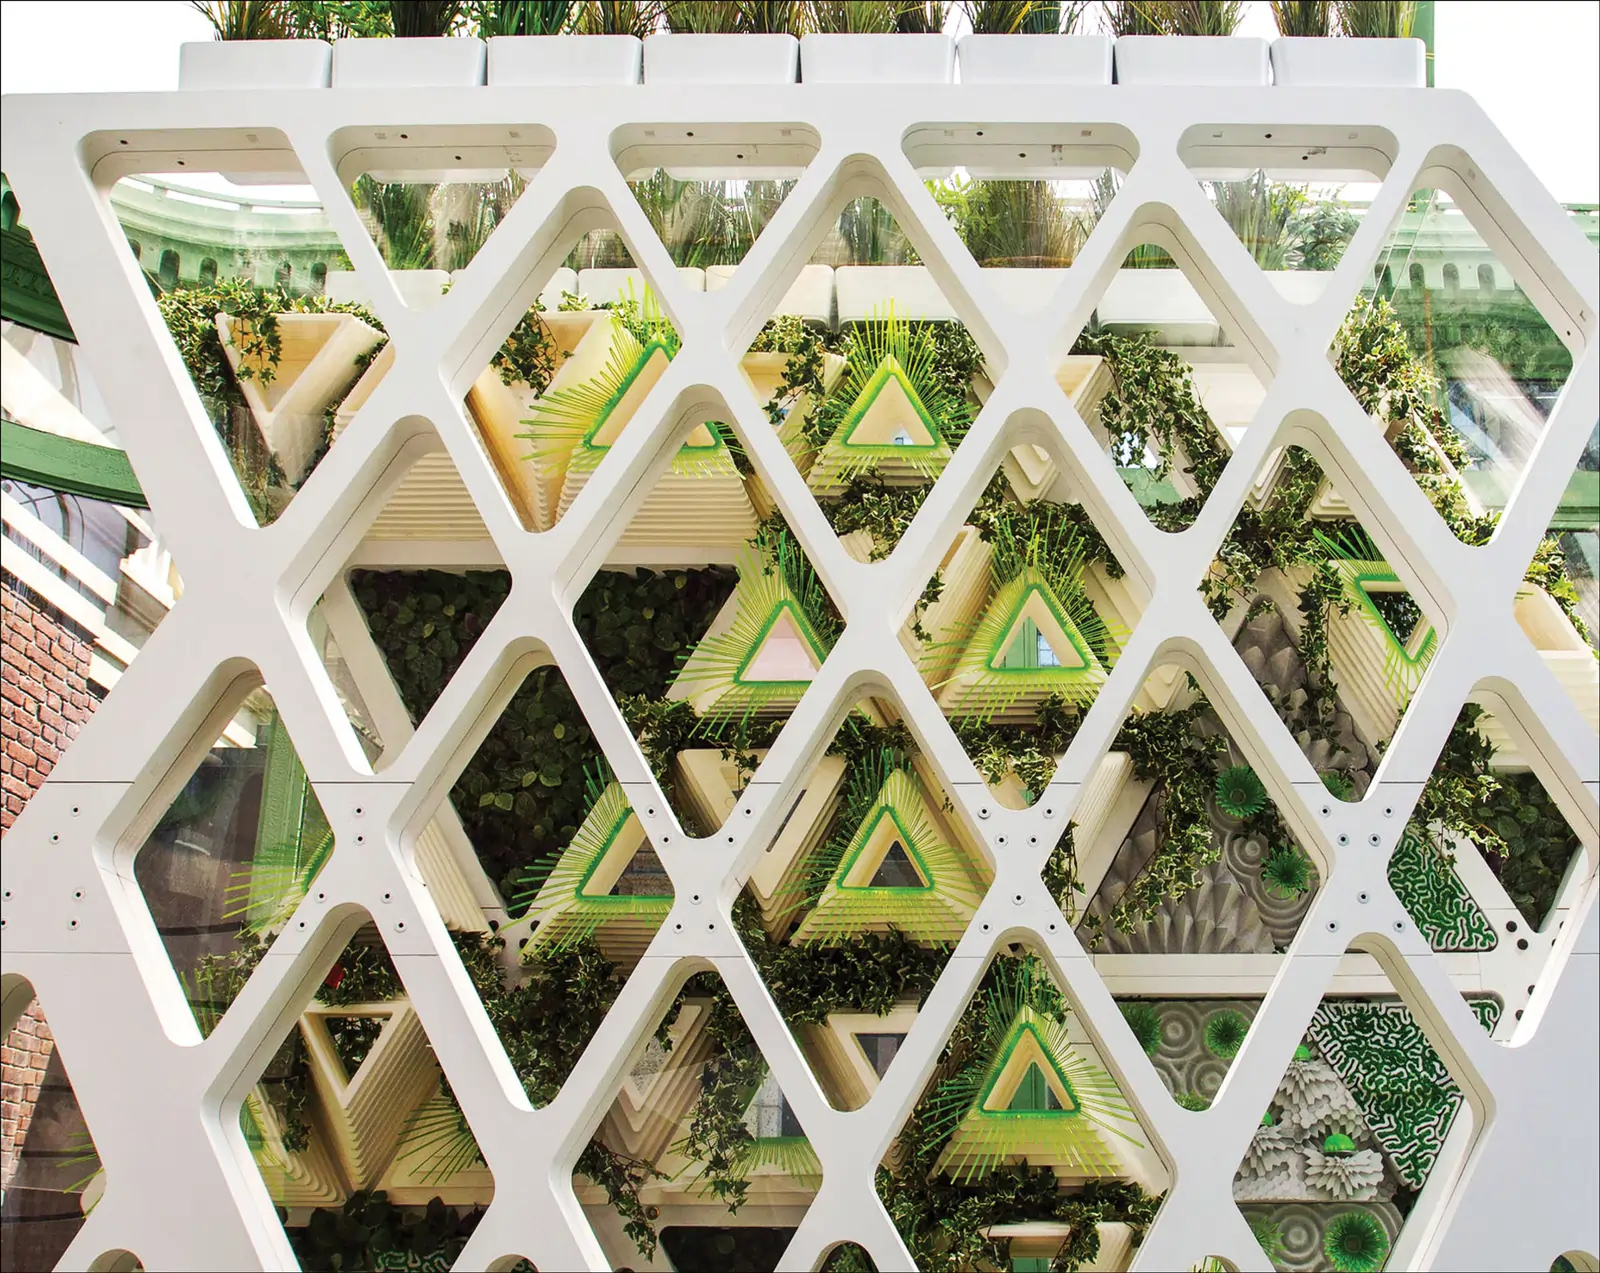 Terreform ONE designed this seven-story-tall habitat for monarch butterfl ies as part of the doubleskin, climate-controlled façade, solarpaneled green roof, and atrium of a commercial building in New York City (building model shown here). Mitchell Joachim is the project’s principal investigator. Courtesy of Terreform ONE.